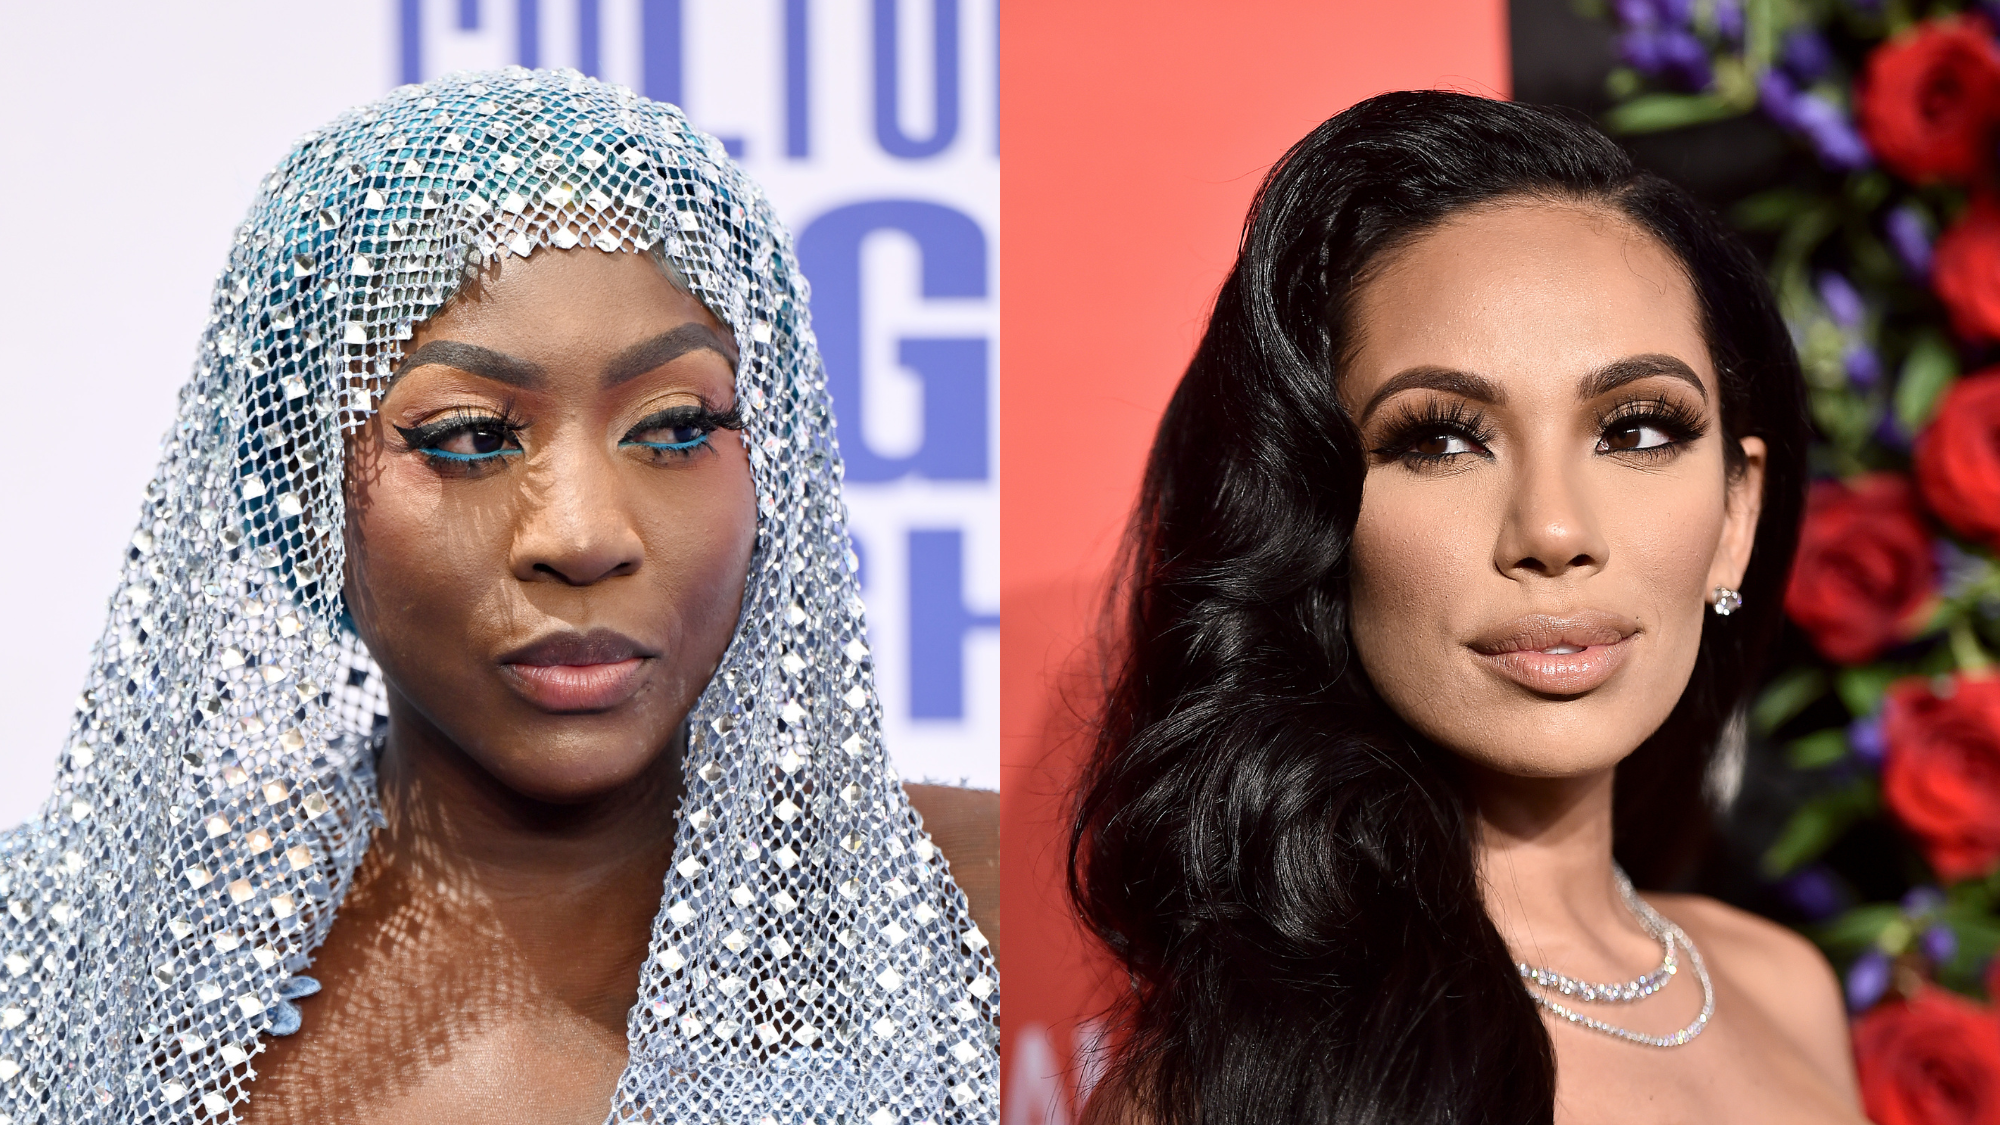 Spice Says Erica Mena’s Most Recent Apology For Calling Her A “Blue Monkey” Is “Phony”